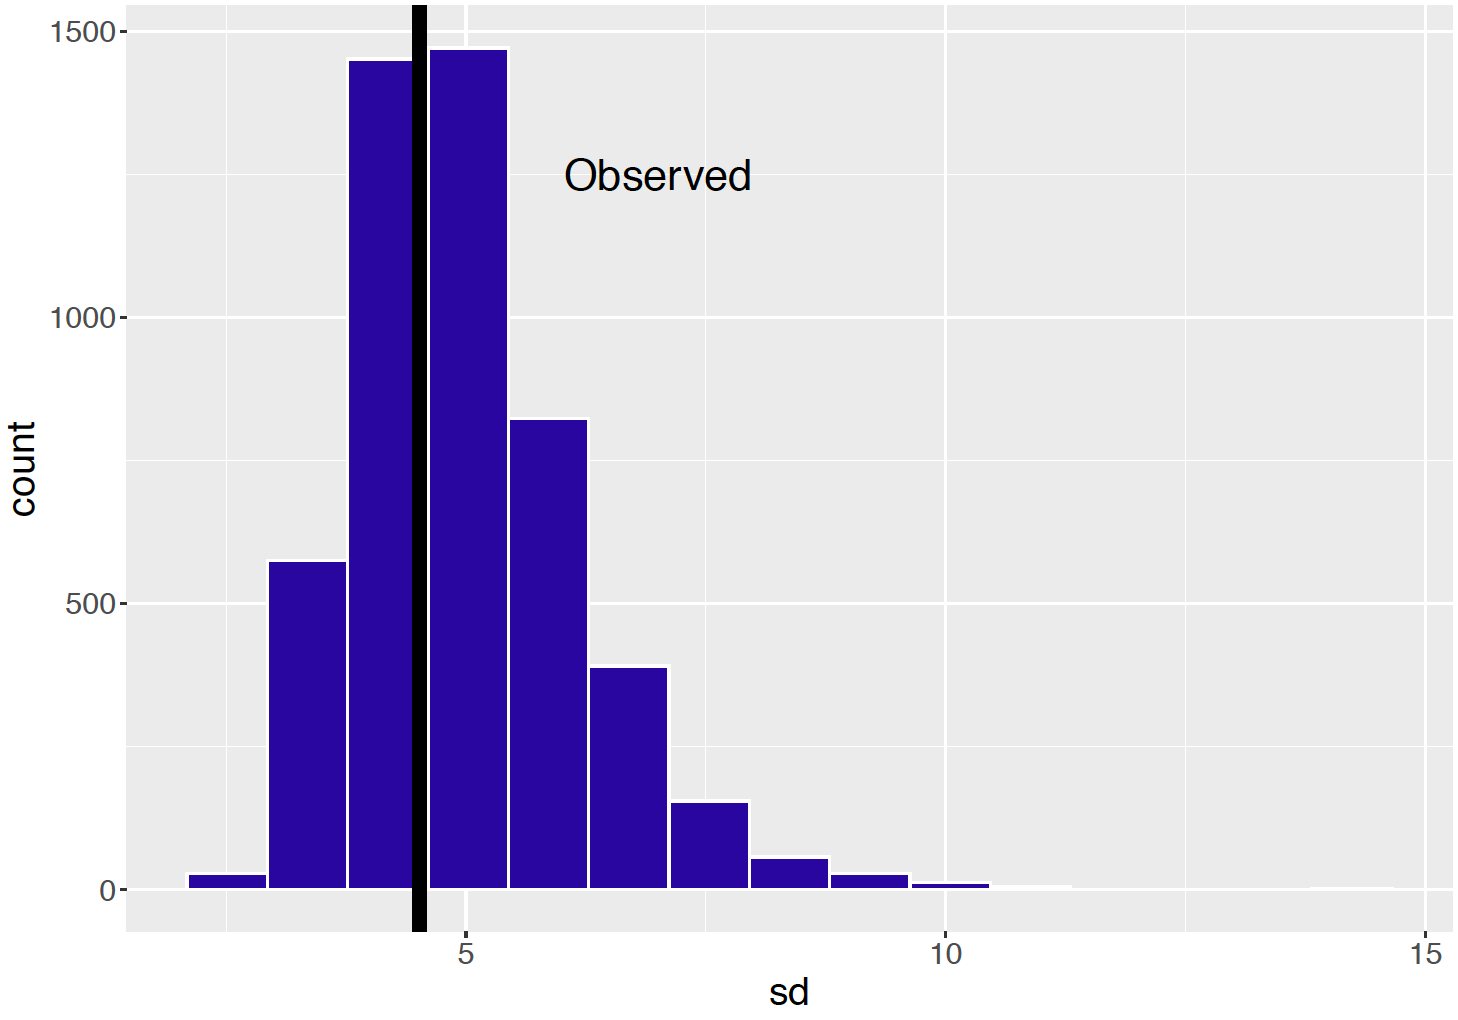 Histogram of standard deviations from 5000 replicates from the posterior predictive distribution in the Negative Binomial sampling model.  The observed standard deviation is displayed as a vertical line.